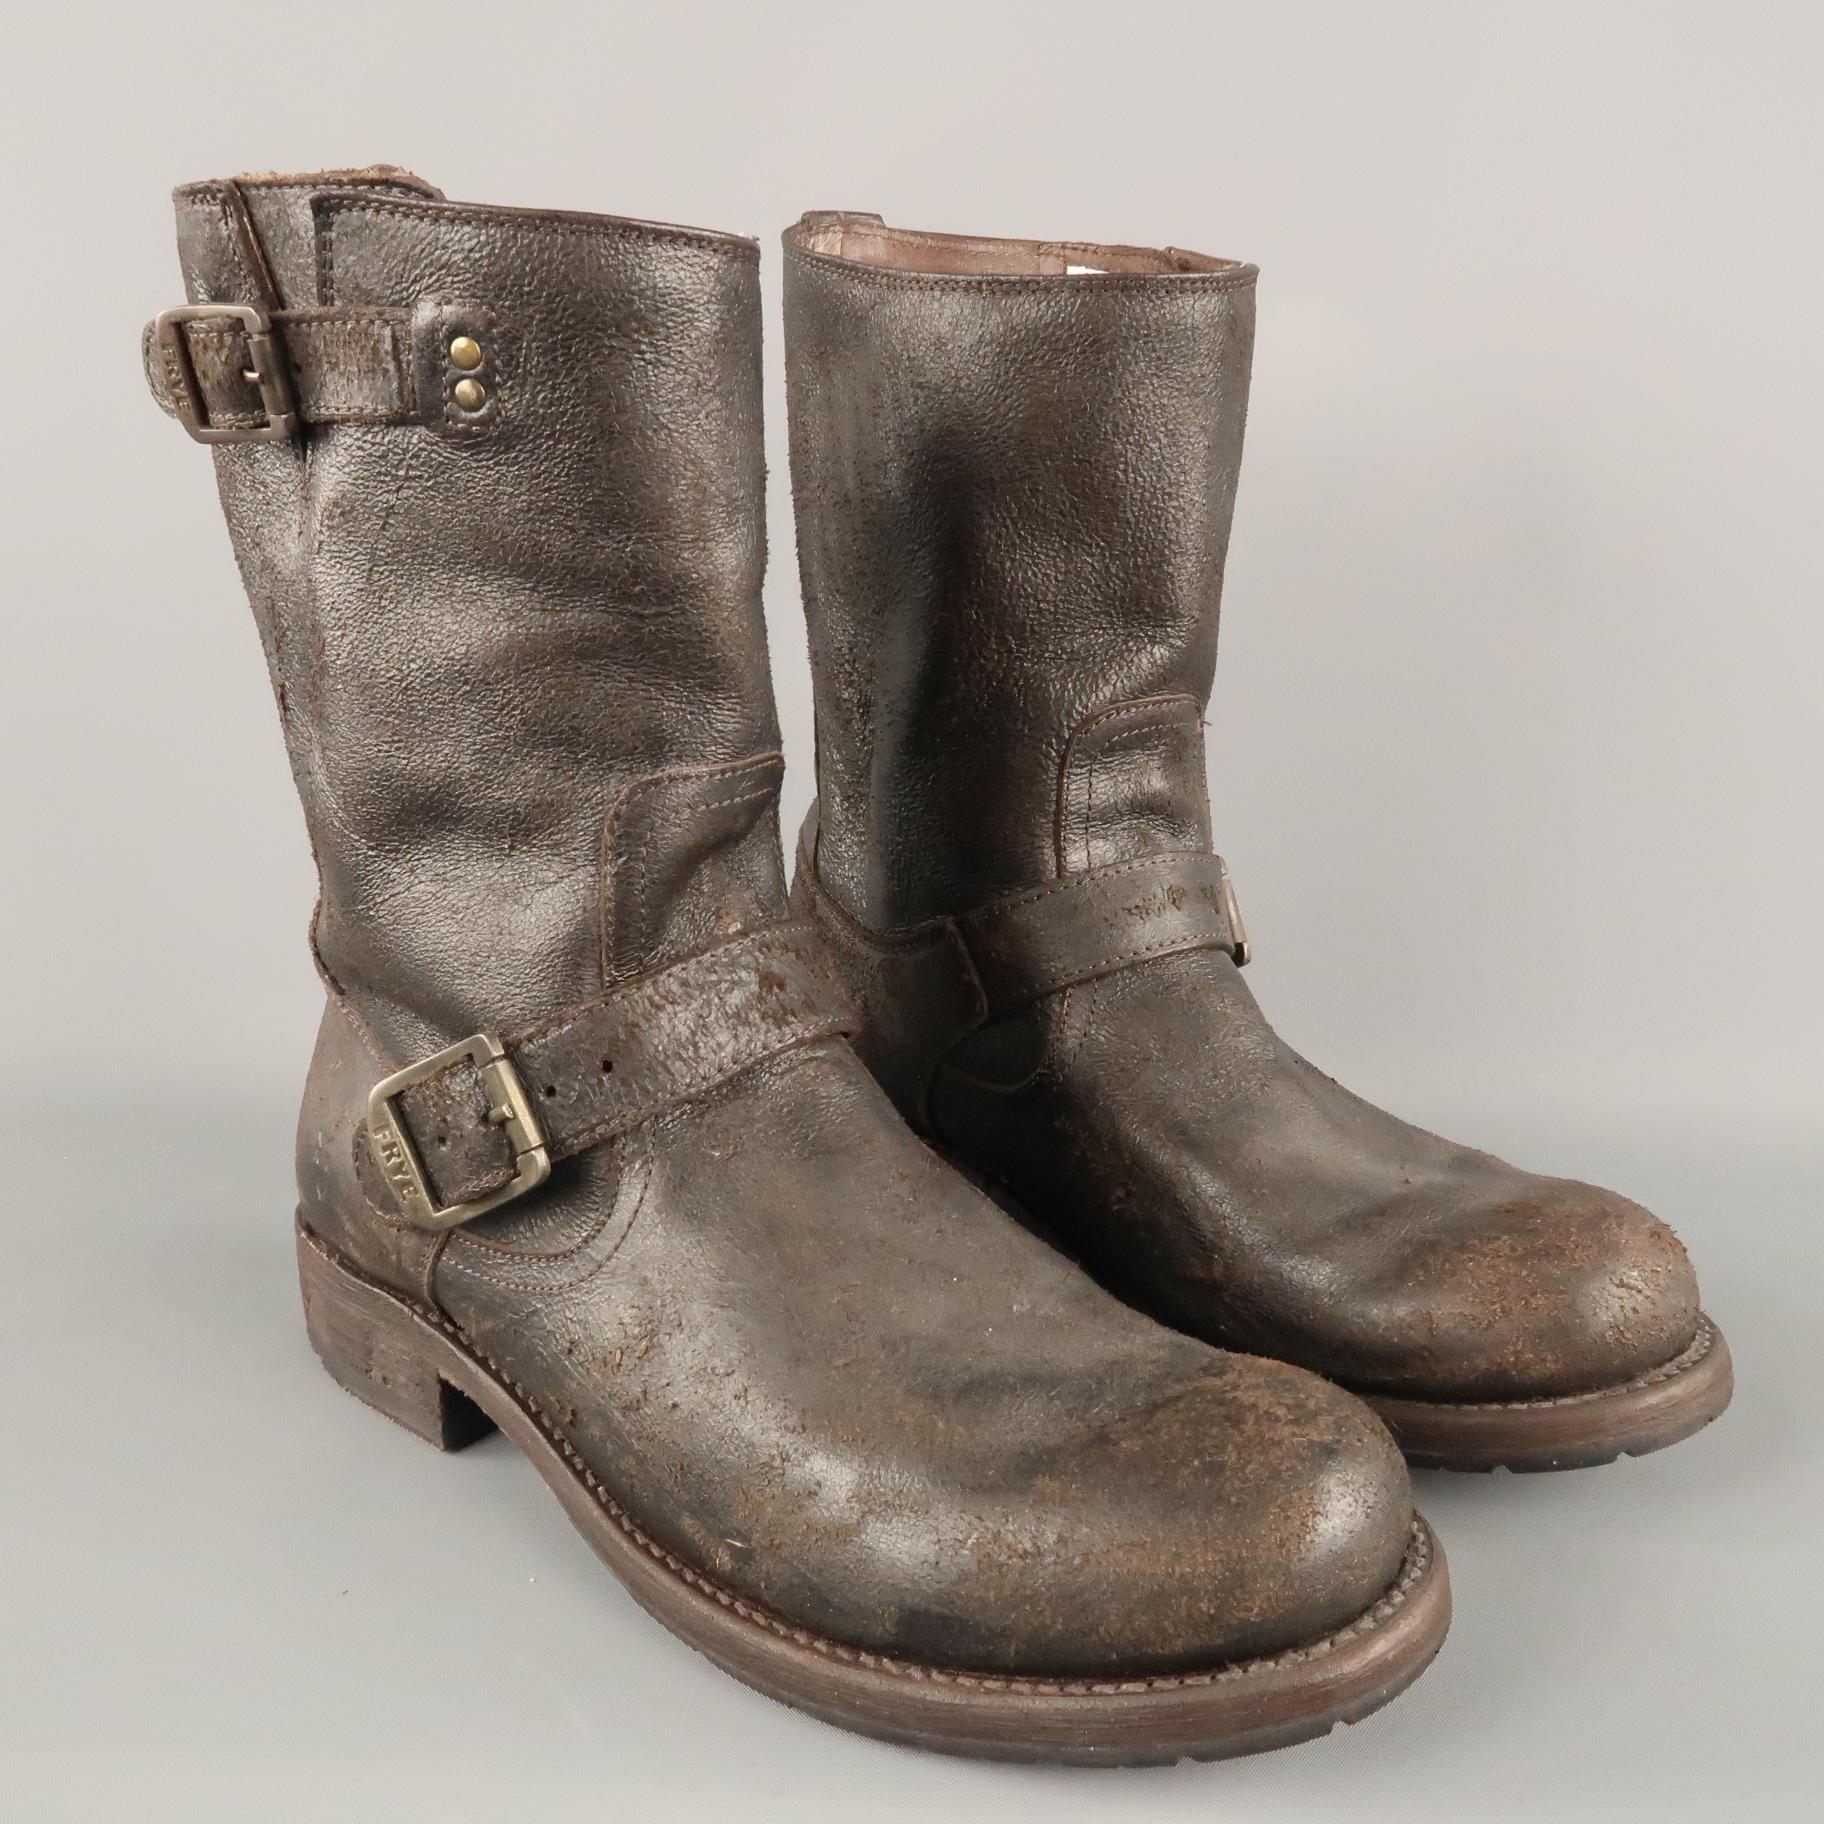 FRYE Motorcycle Boots come in a brown tone in a distressed leather material, with a round toe, and a double buckle and straps. Made in Mexico.
 
Excellent Pre-Owned Condition.
Marked: 7.5

Measurements:

Length: 11.5 in.
Width: 4.2 in.
Height: 10.5